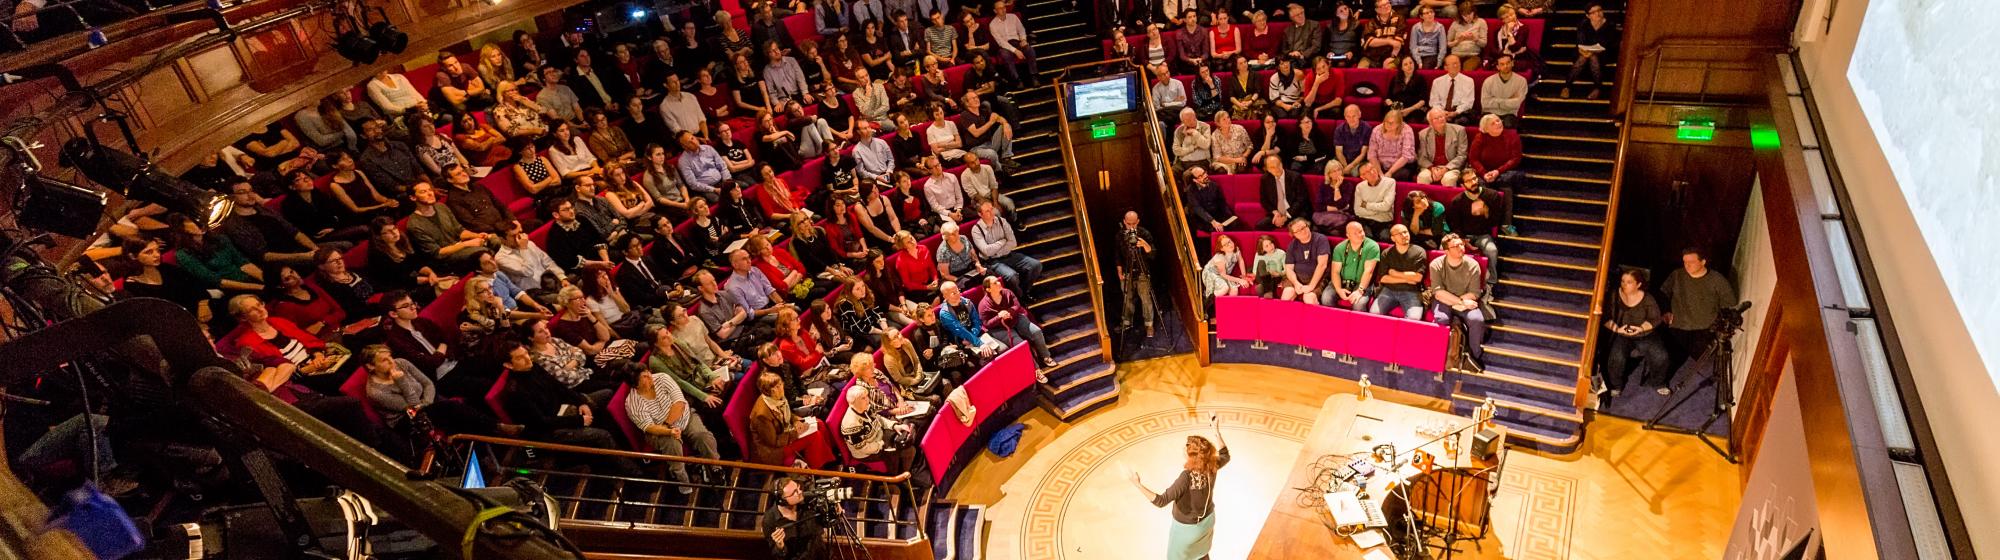 Royal Institution London 2019 event